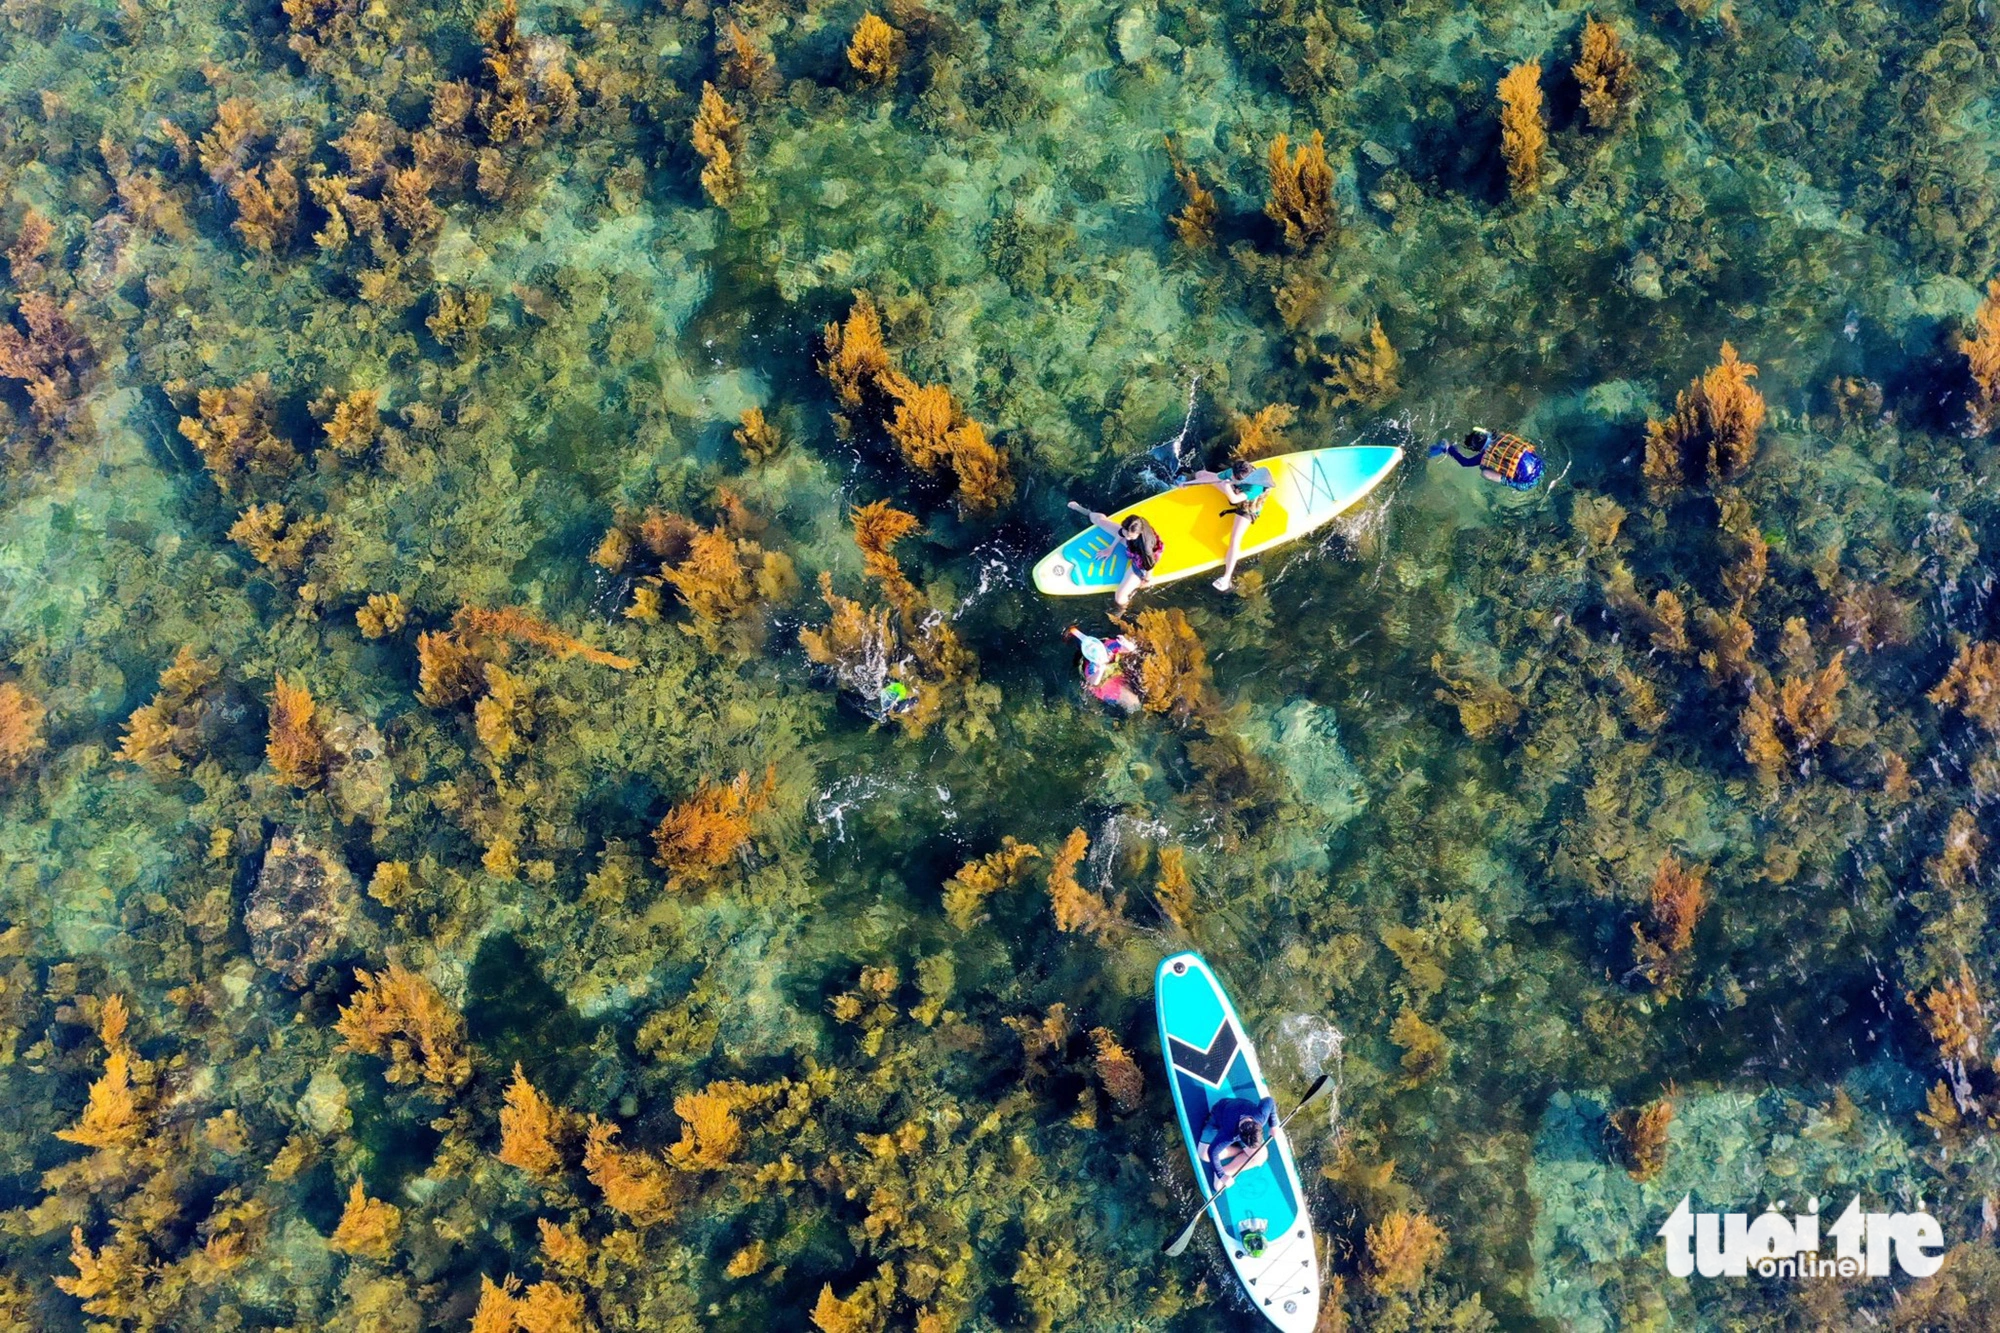 Experiencing stand-up paddleboarding and admiring yellow-brown seaweed are among the must-try activities for visitors to Nhon Hai during the seaweed season between May and July. Photo: Huong Mai / Tuoi Tre